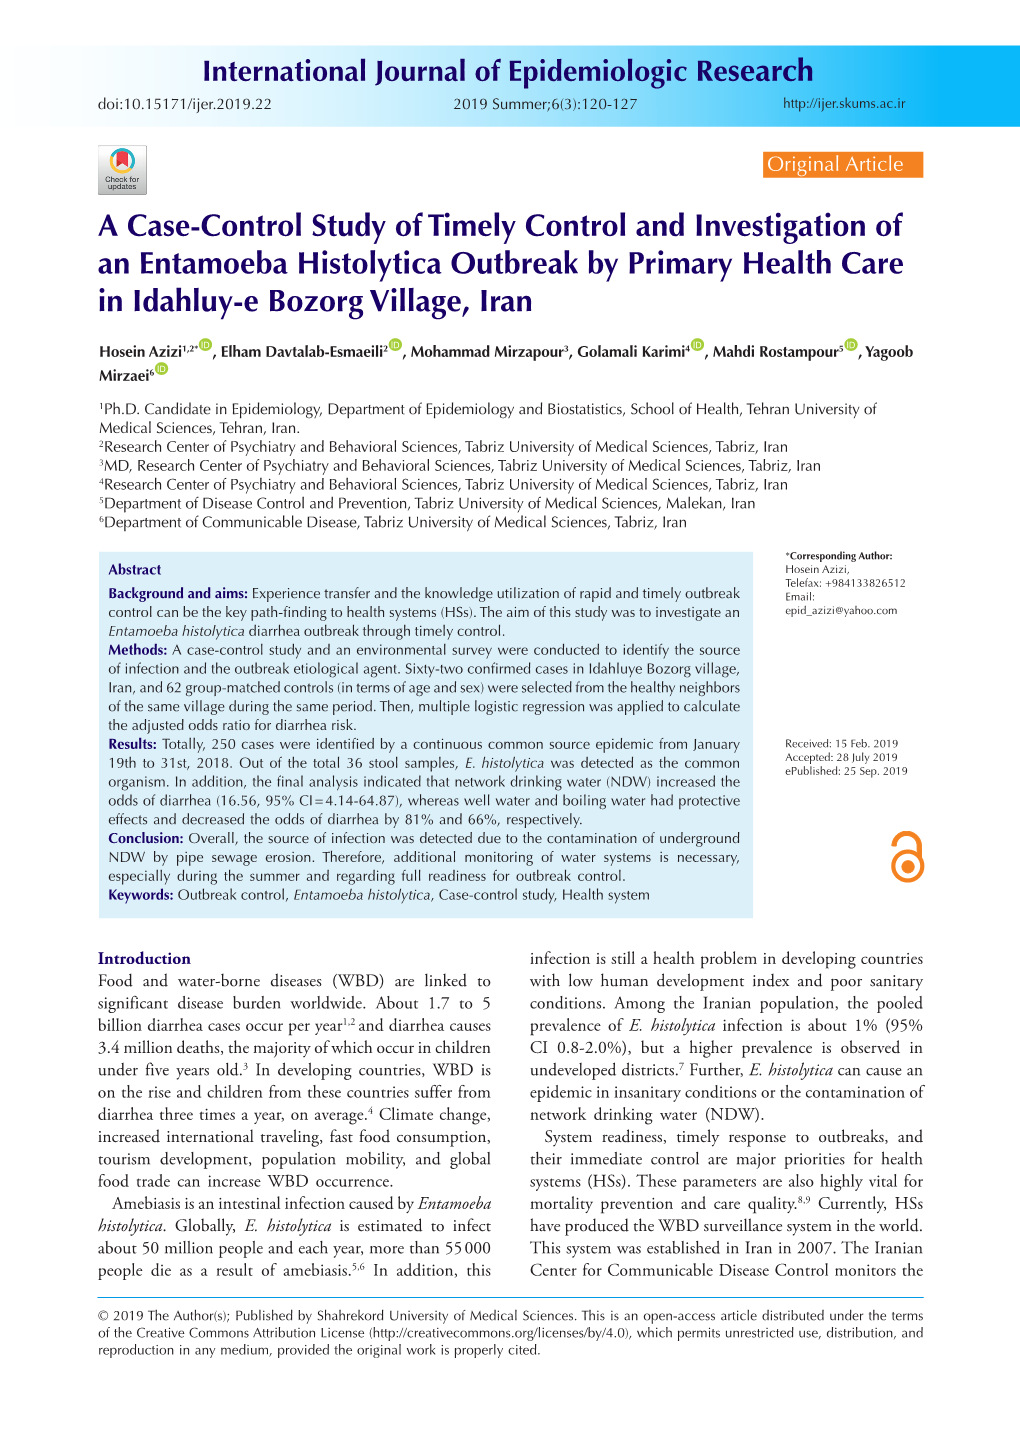 A Case-Control Study of Timely Control and Investigation of an Entamoeba Histolytica Outbreak by Primary Health Care in Idahluy-E Bozorg Village, Iran